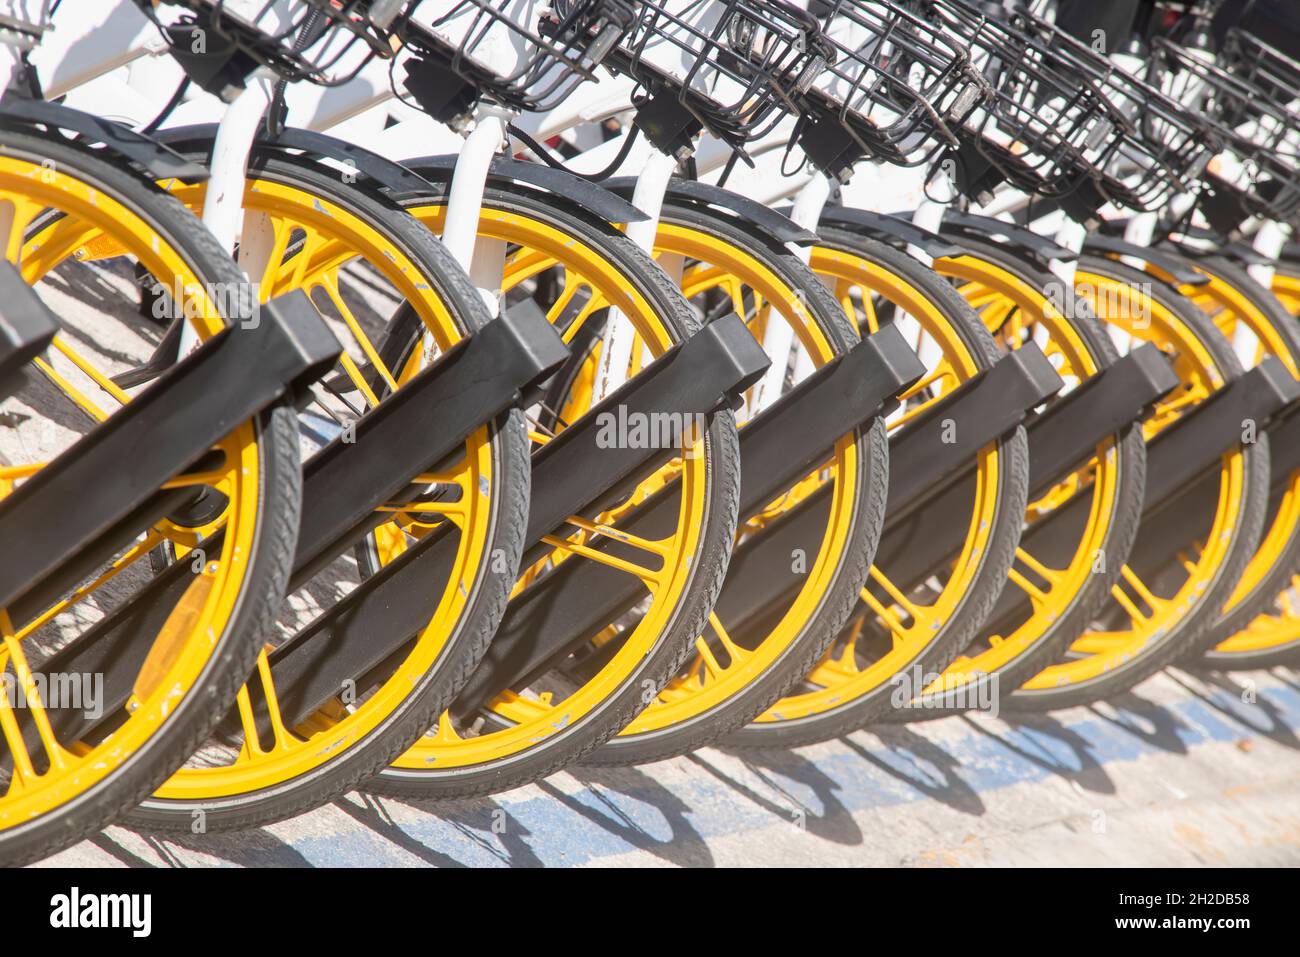 Close-up of a Row of bicycles parked. Row of parked colorful bicycles. Rental yellow bicycles. Stock Photo